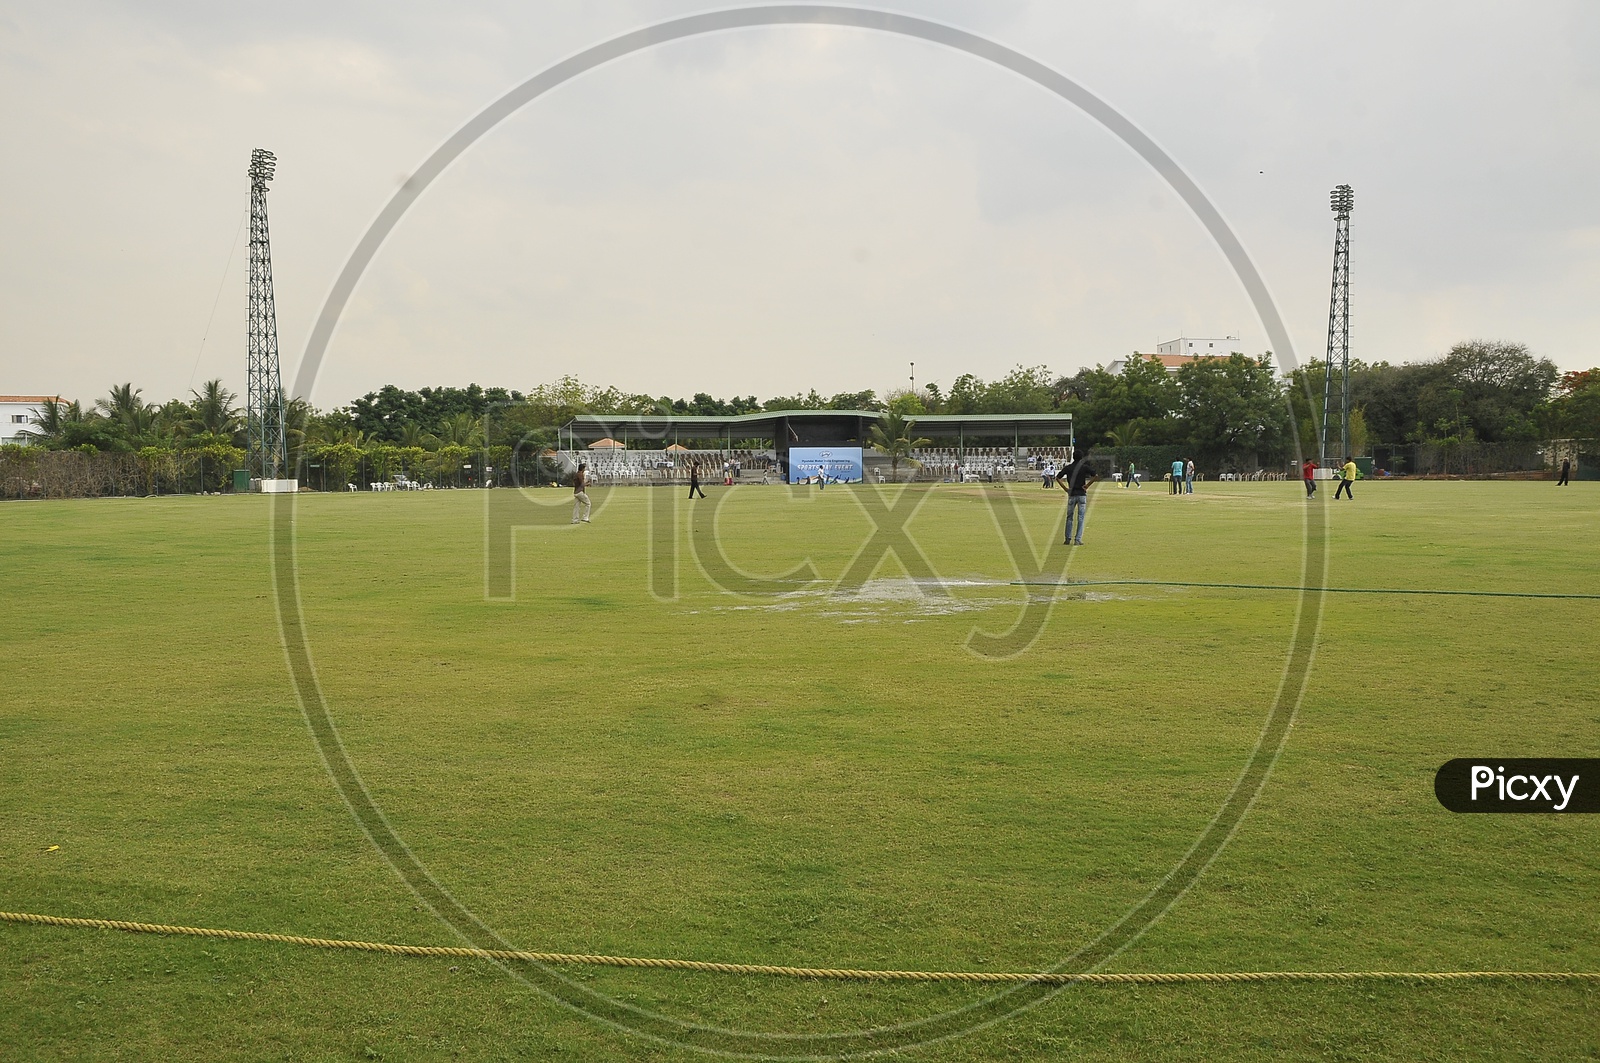 Players having practice session in a cricket ground